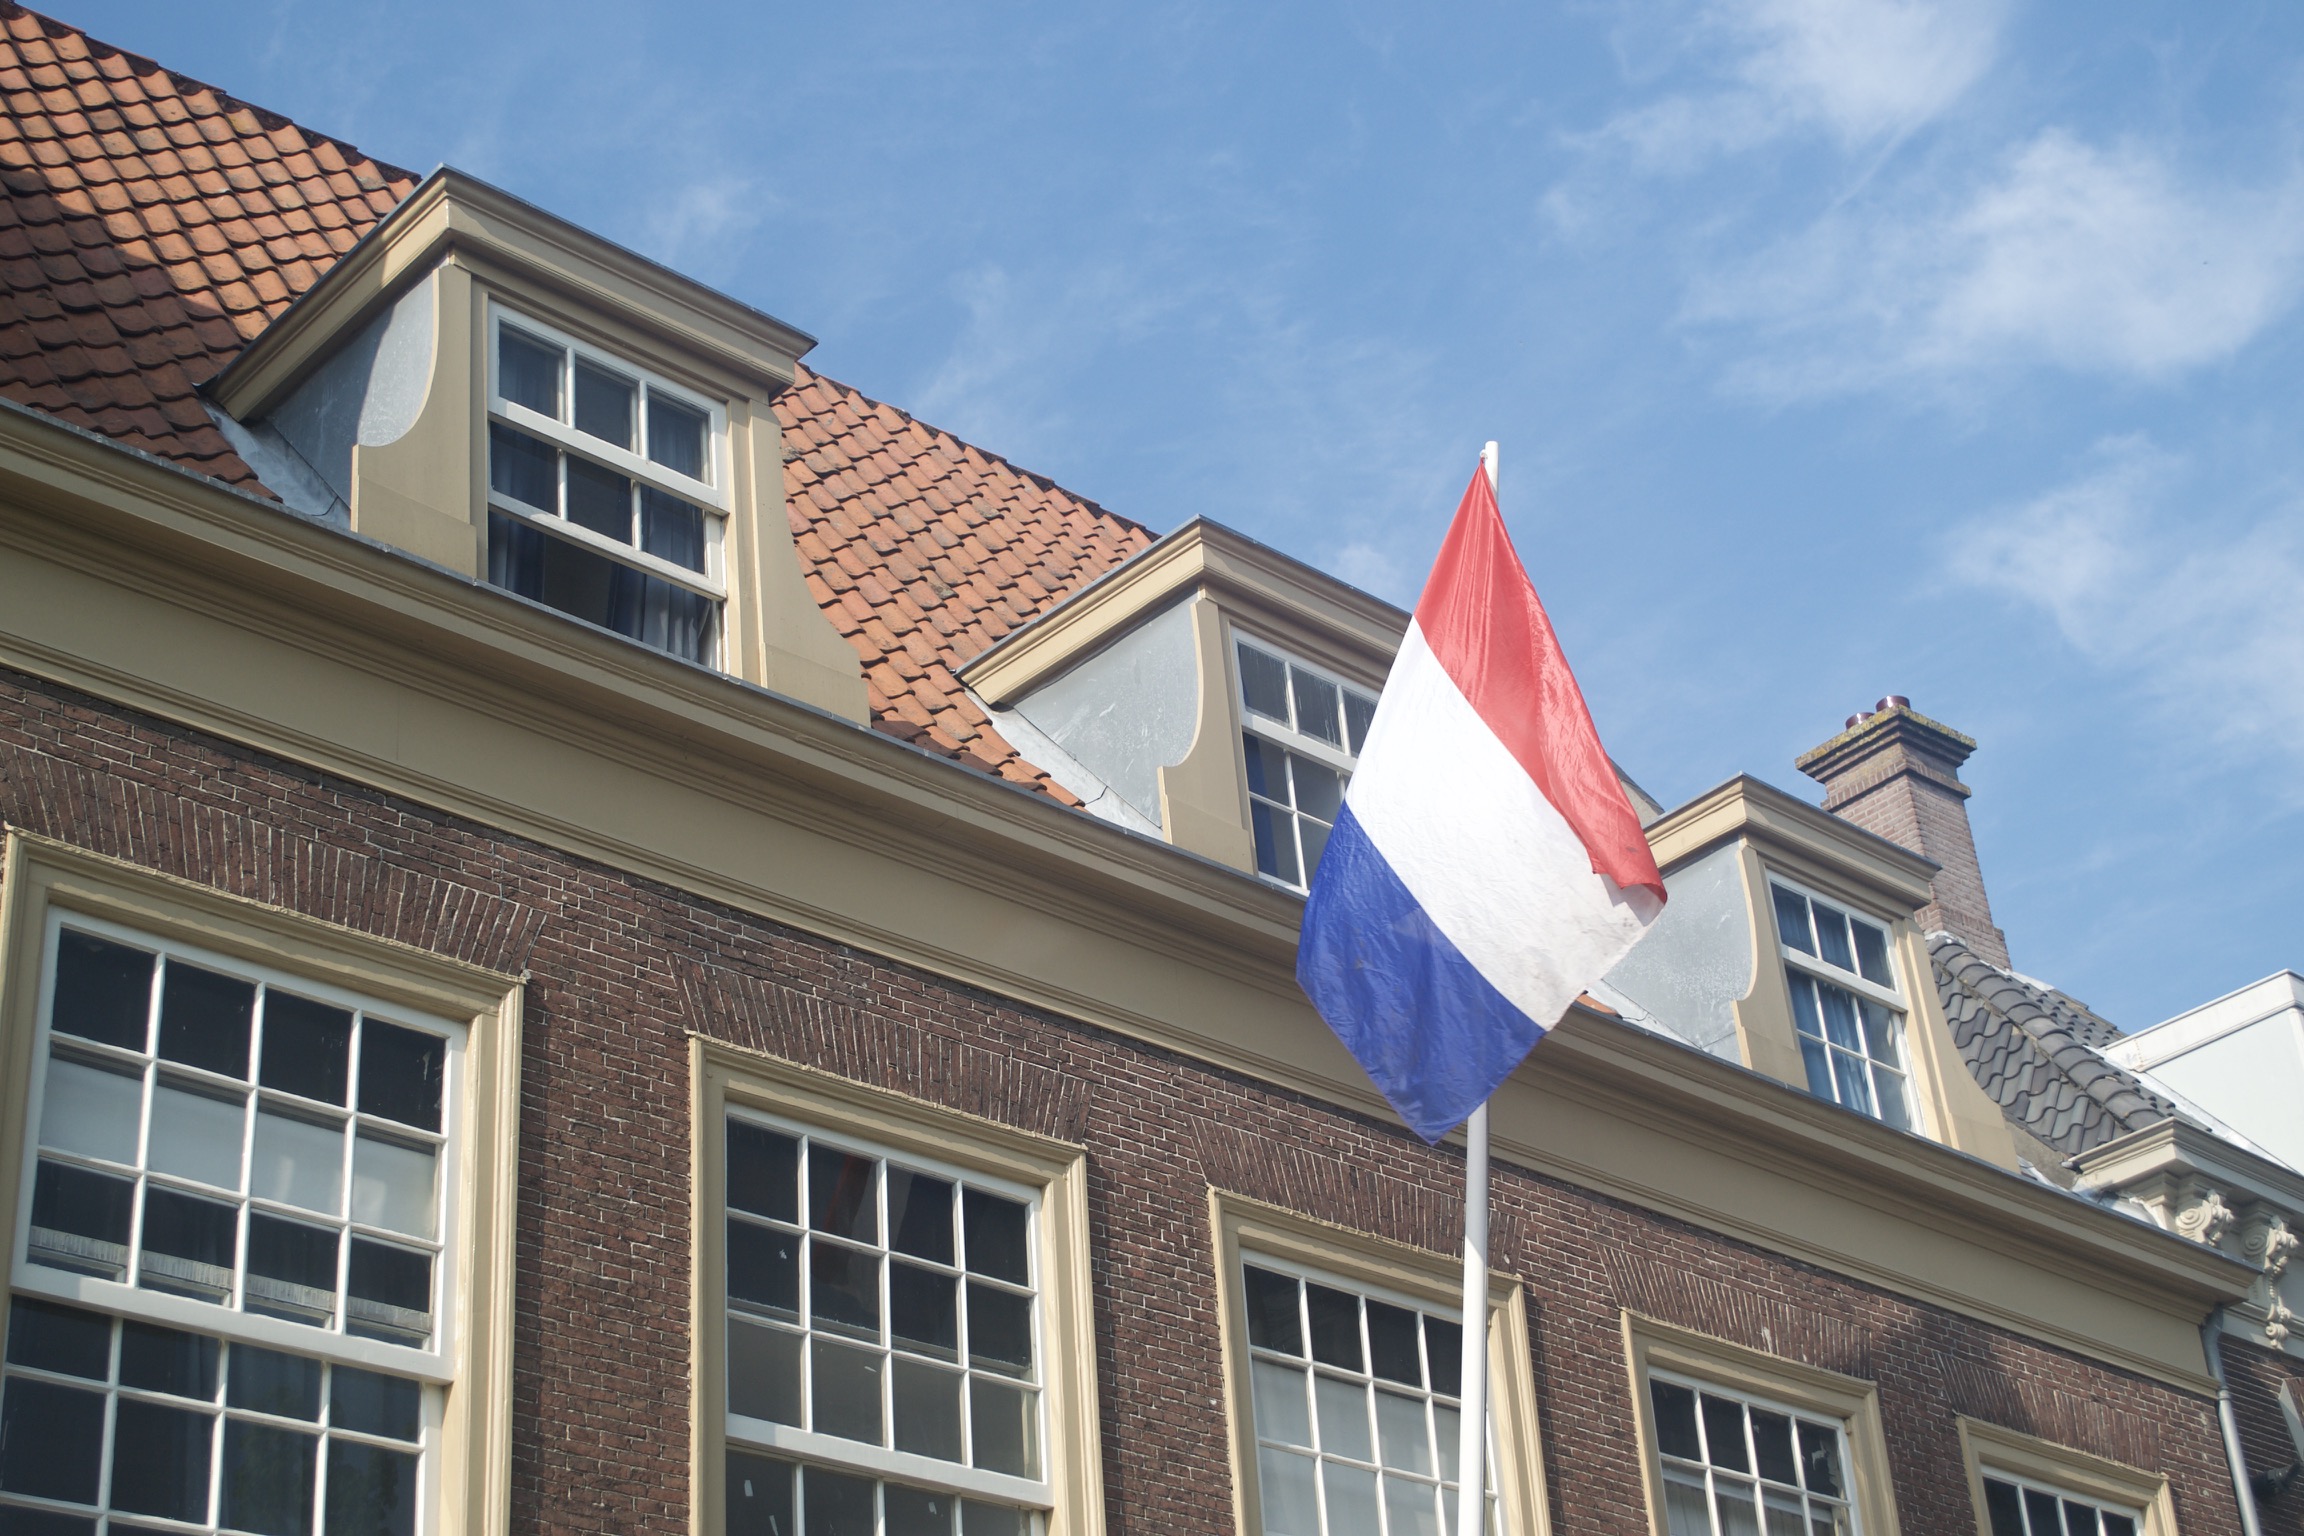 A flag of the Netherlands flys on a pole from a house.